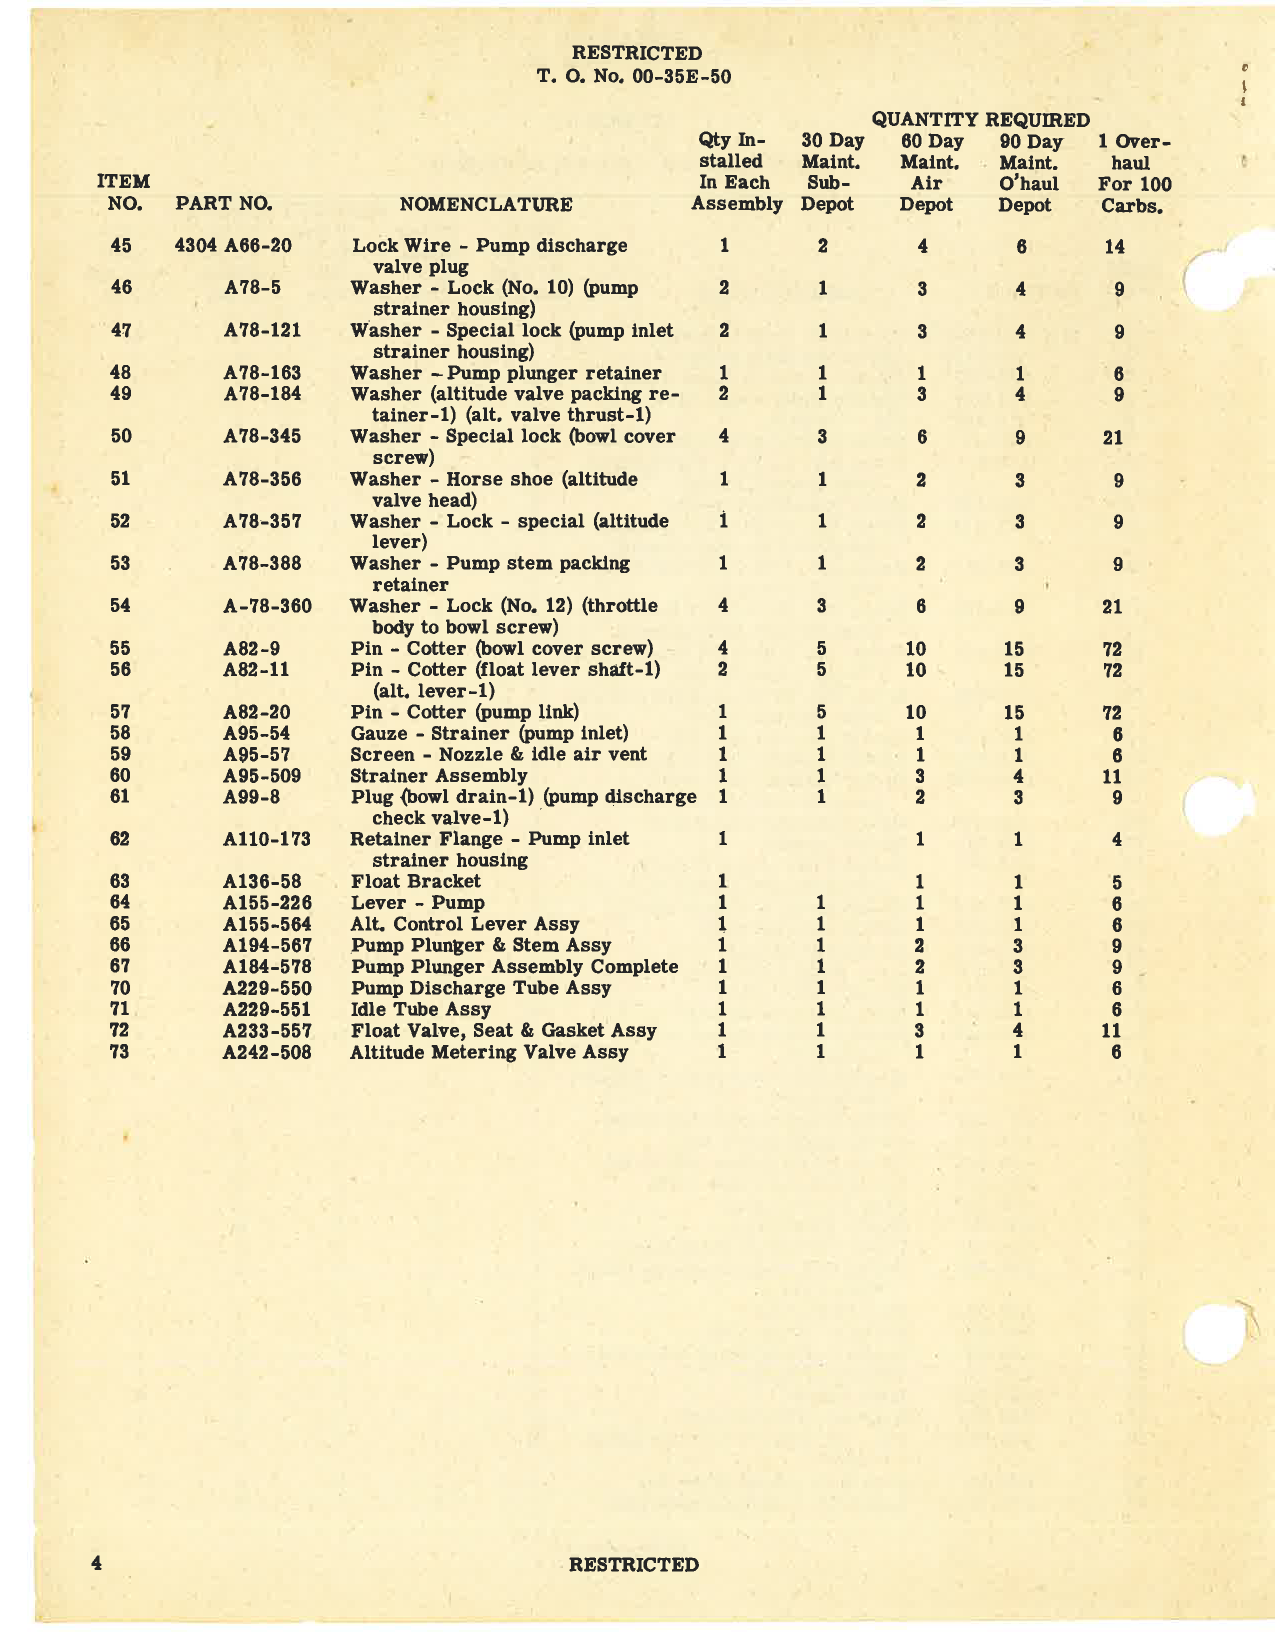 Sample page 6 from AirCorps Library document: Table of Credit - Maintenance & Overhaul Parts for Marvel Schebler Carburetors